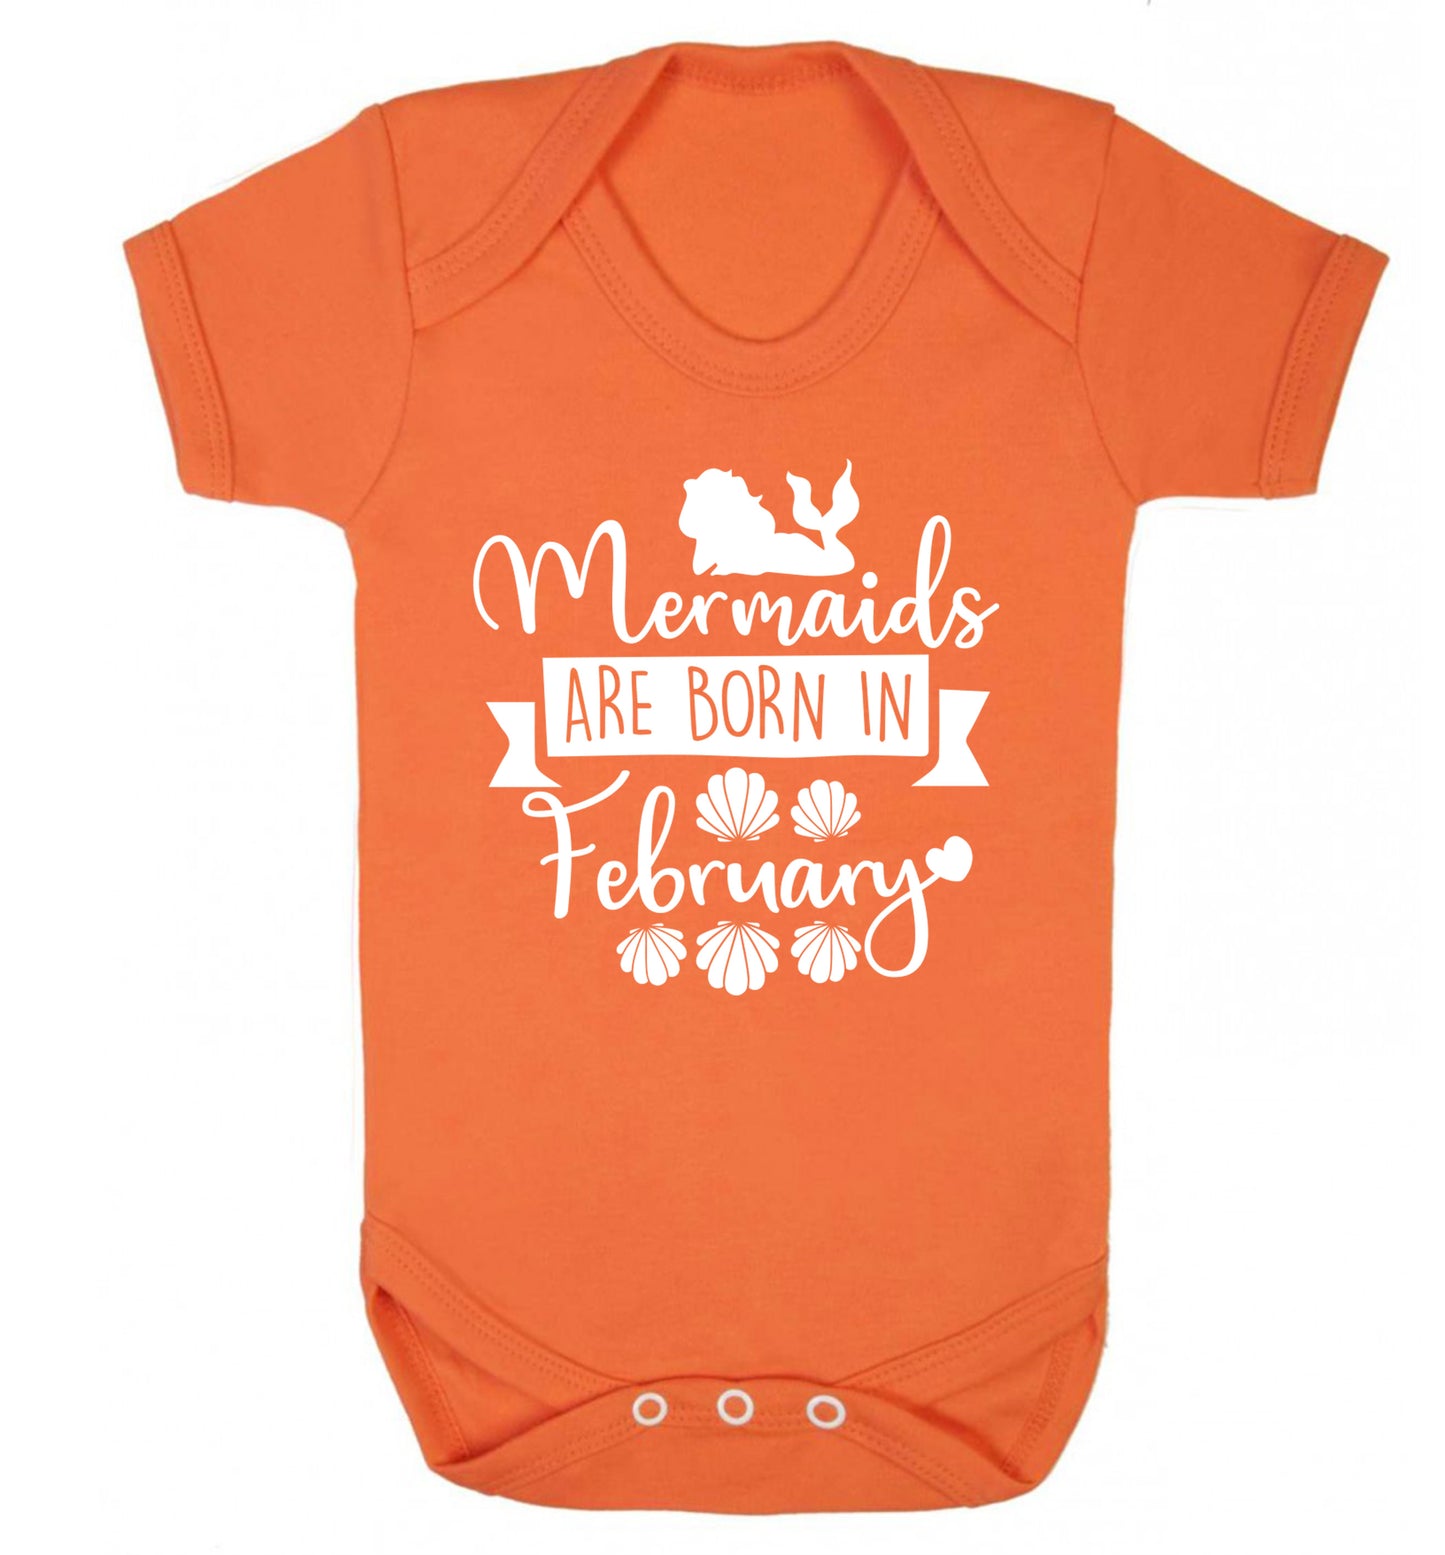 Mermaids are born in February Baby Vest orange 18-24 months